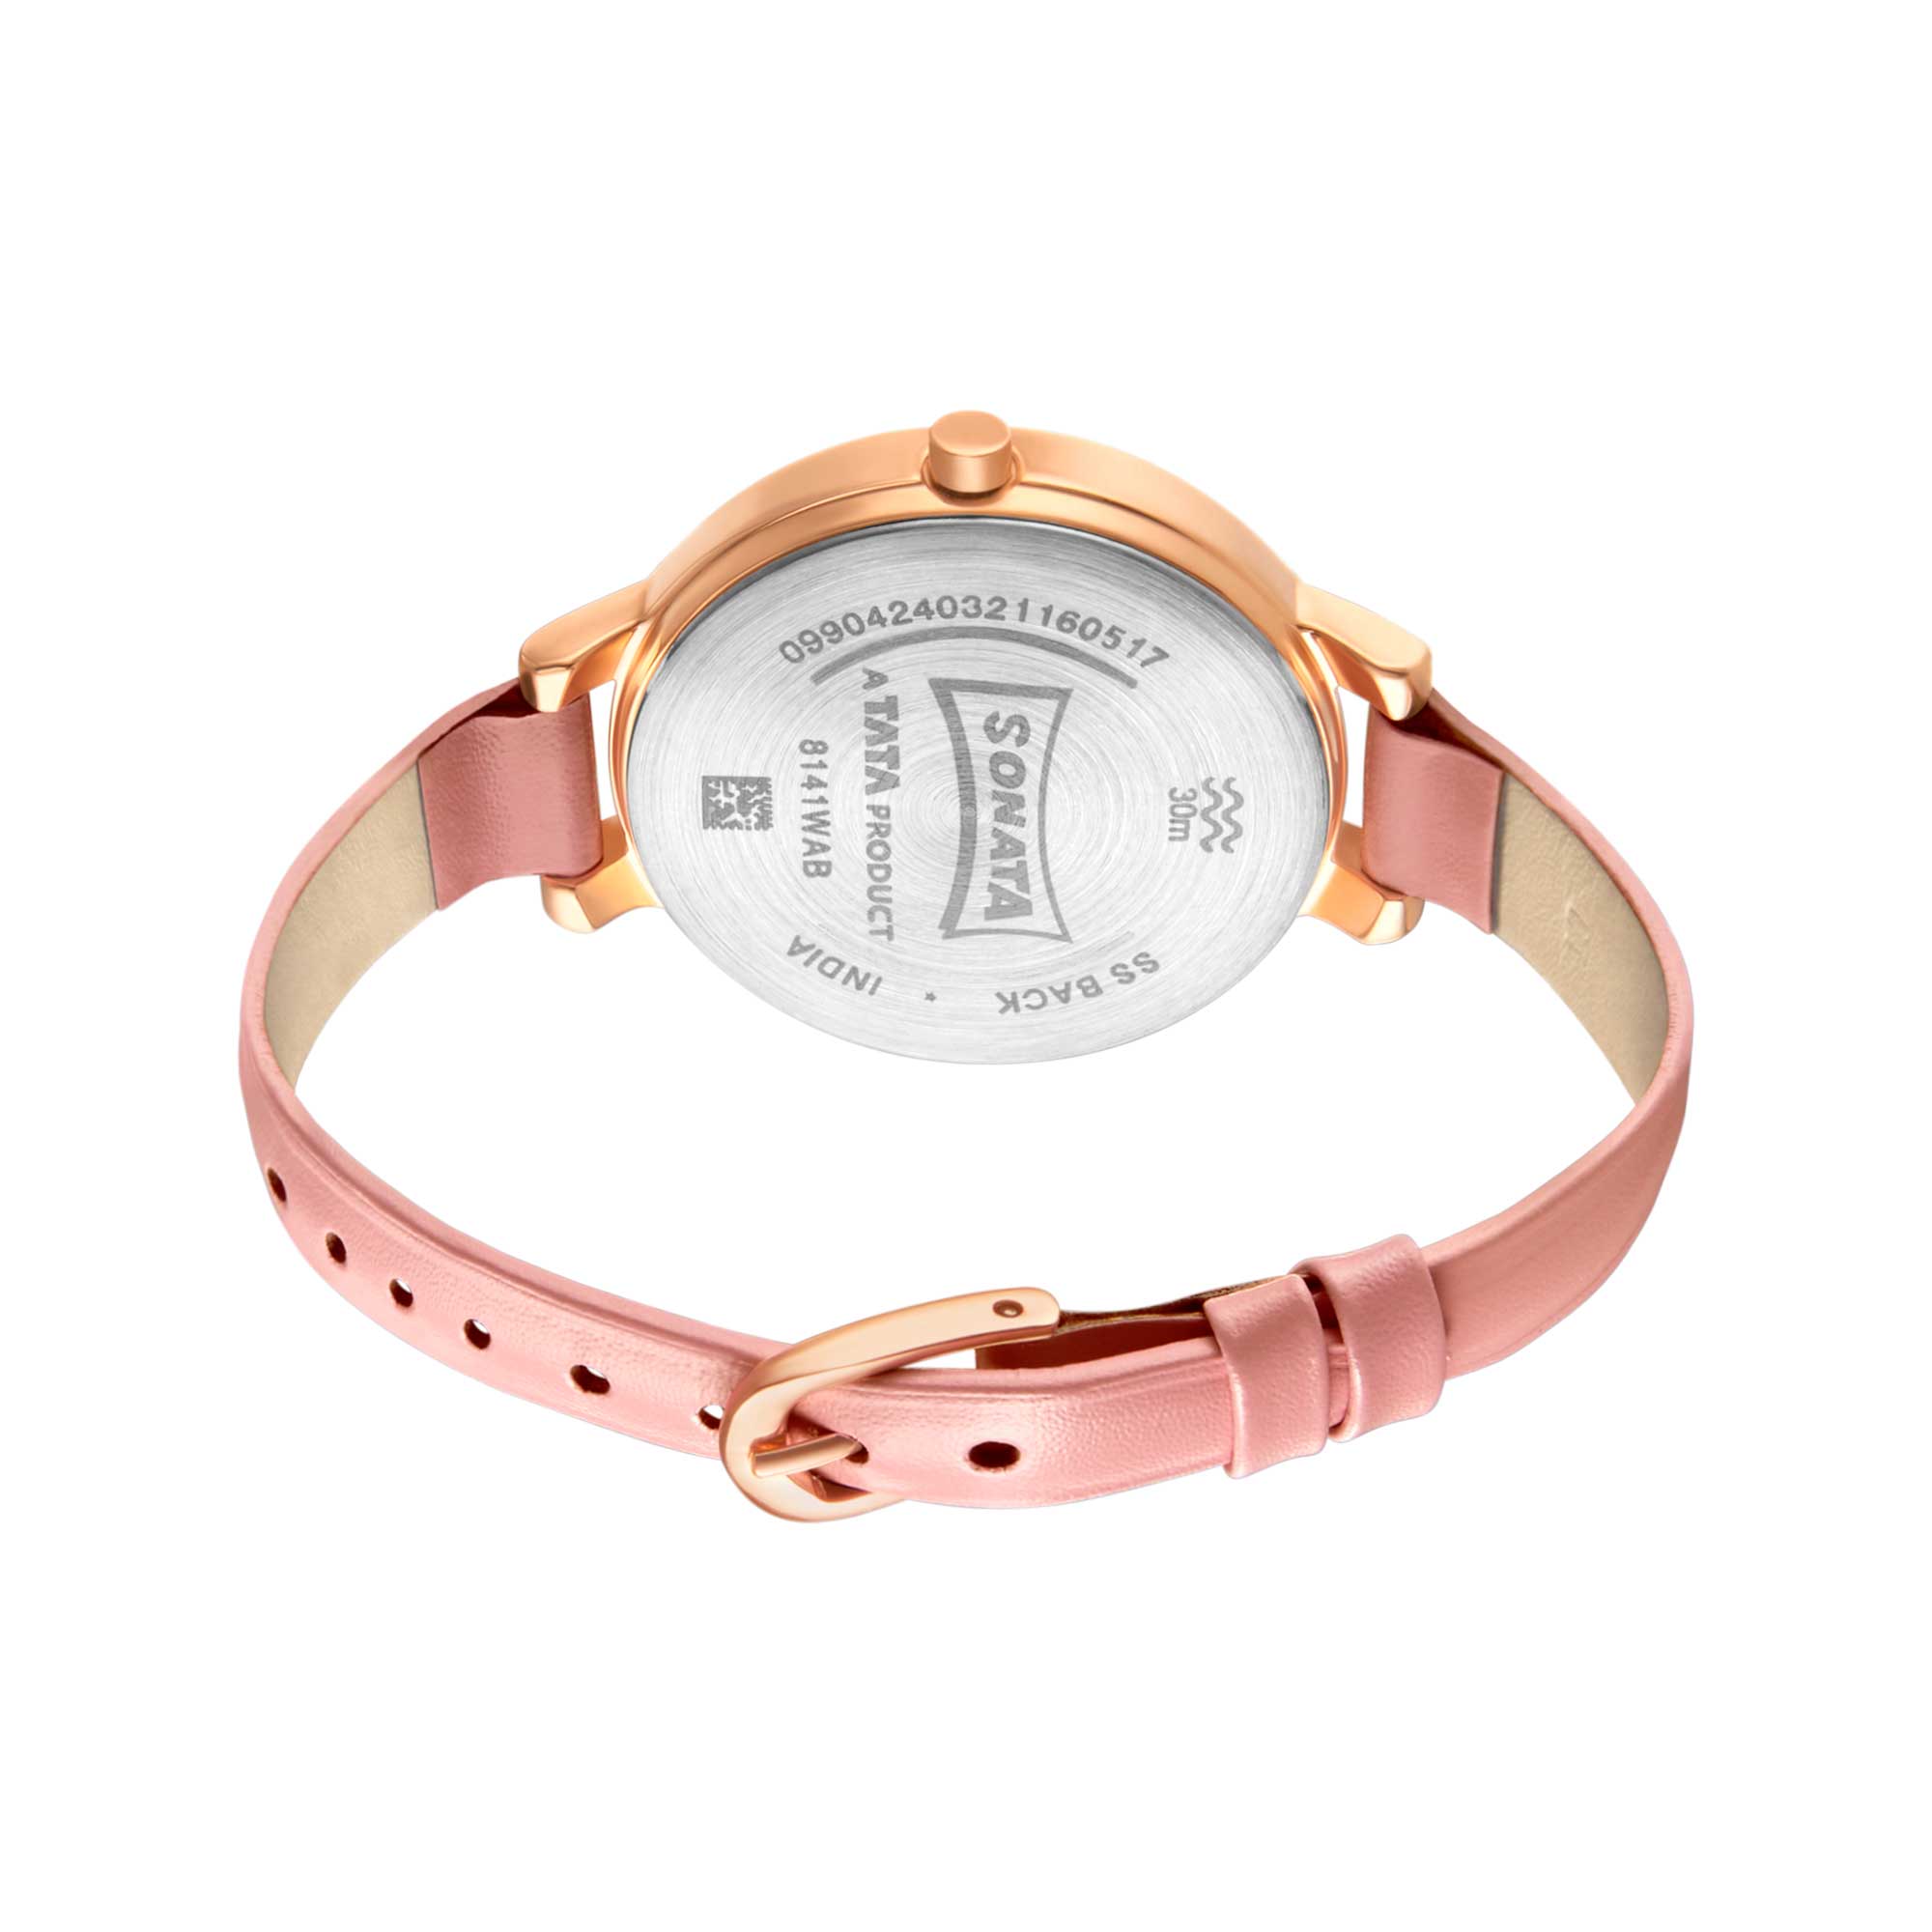 Sonata Play Pink Dial Women Watch With Leather Strap